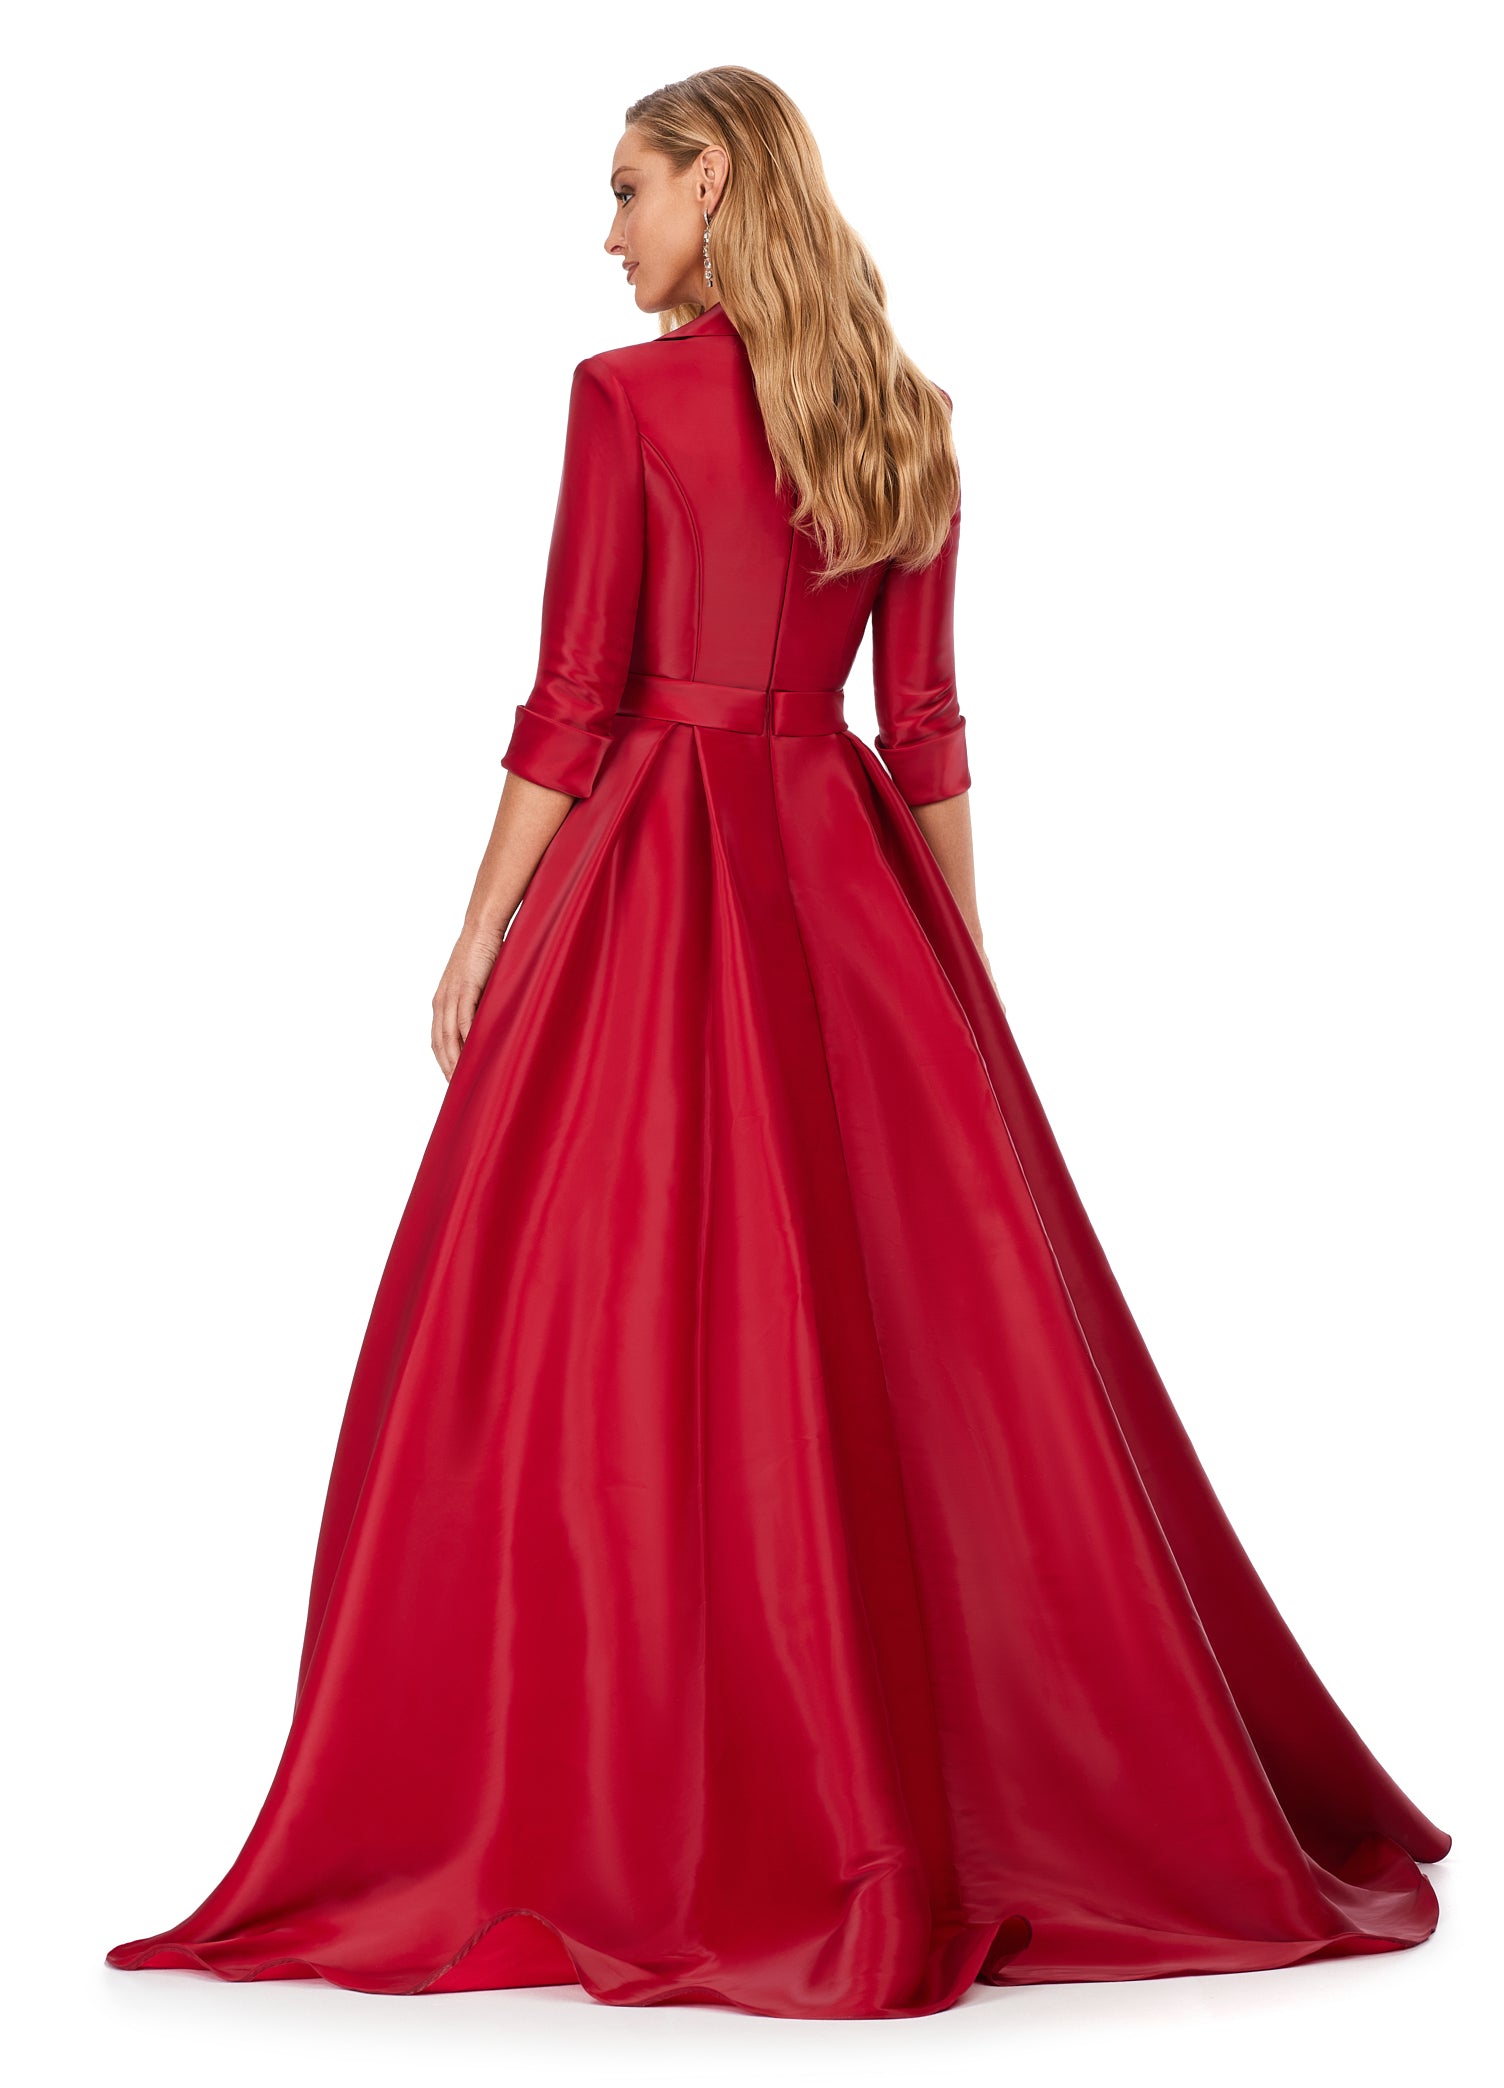 Red Beaded Red Ballgown Wedding Dress With Long Sleeves, Appliques, Sheer V  Neckline, Satin Fabric, And Sweep Train From Weddingteam, $254.02 |  DHgate.Com